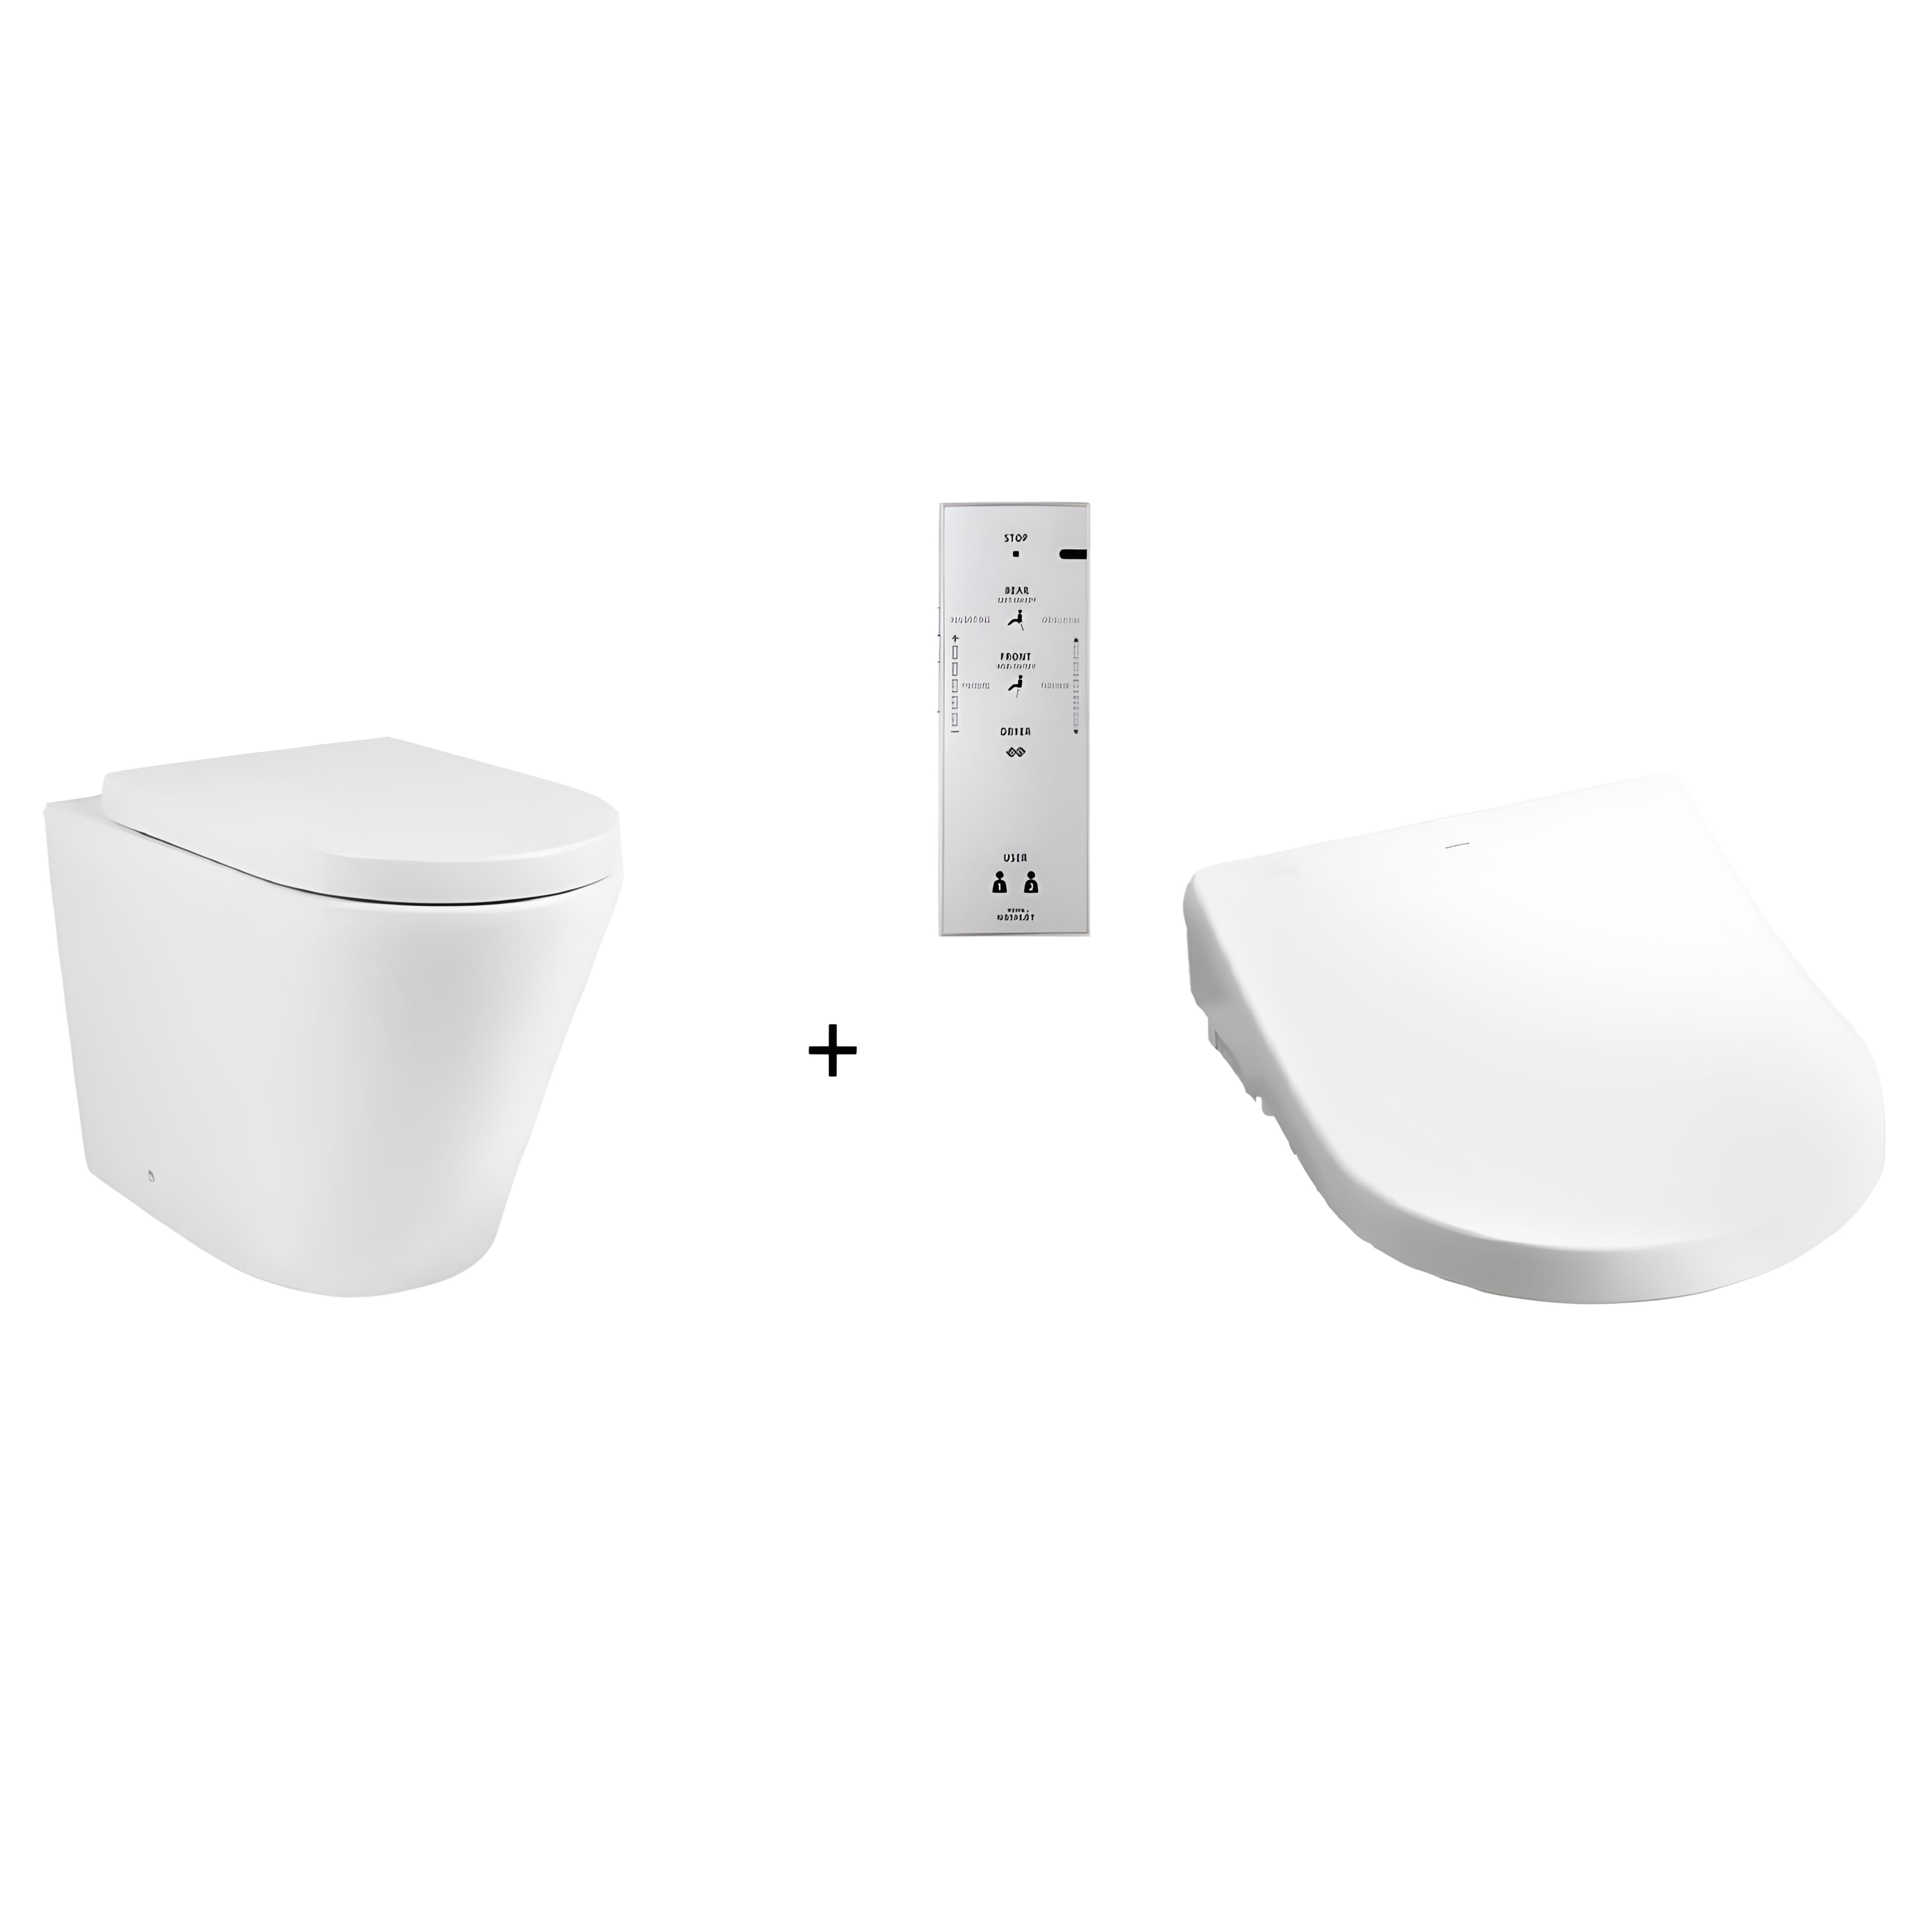 TOTO WASHLET W/ REMOTE CONTROL AND AUTOLID WALL FACED RIMLESS TOILET PACKAGE D-SHAPE GLOSS WHITE